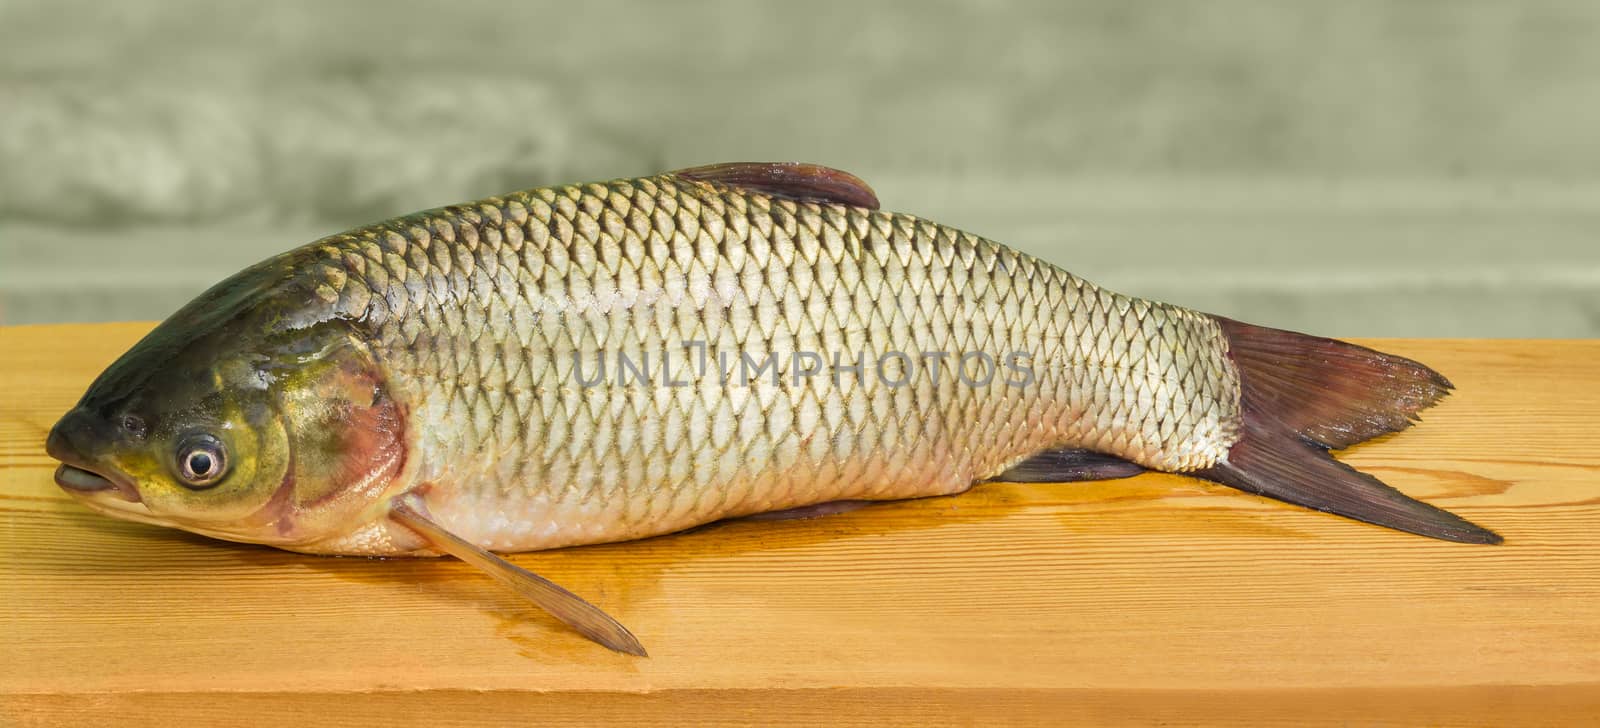 Freshly caught grass carp on a surface of the wooden planks closeup
